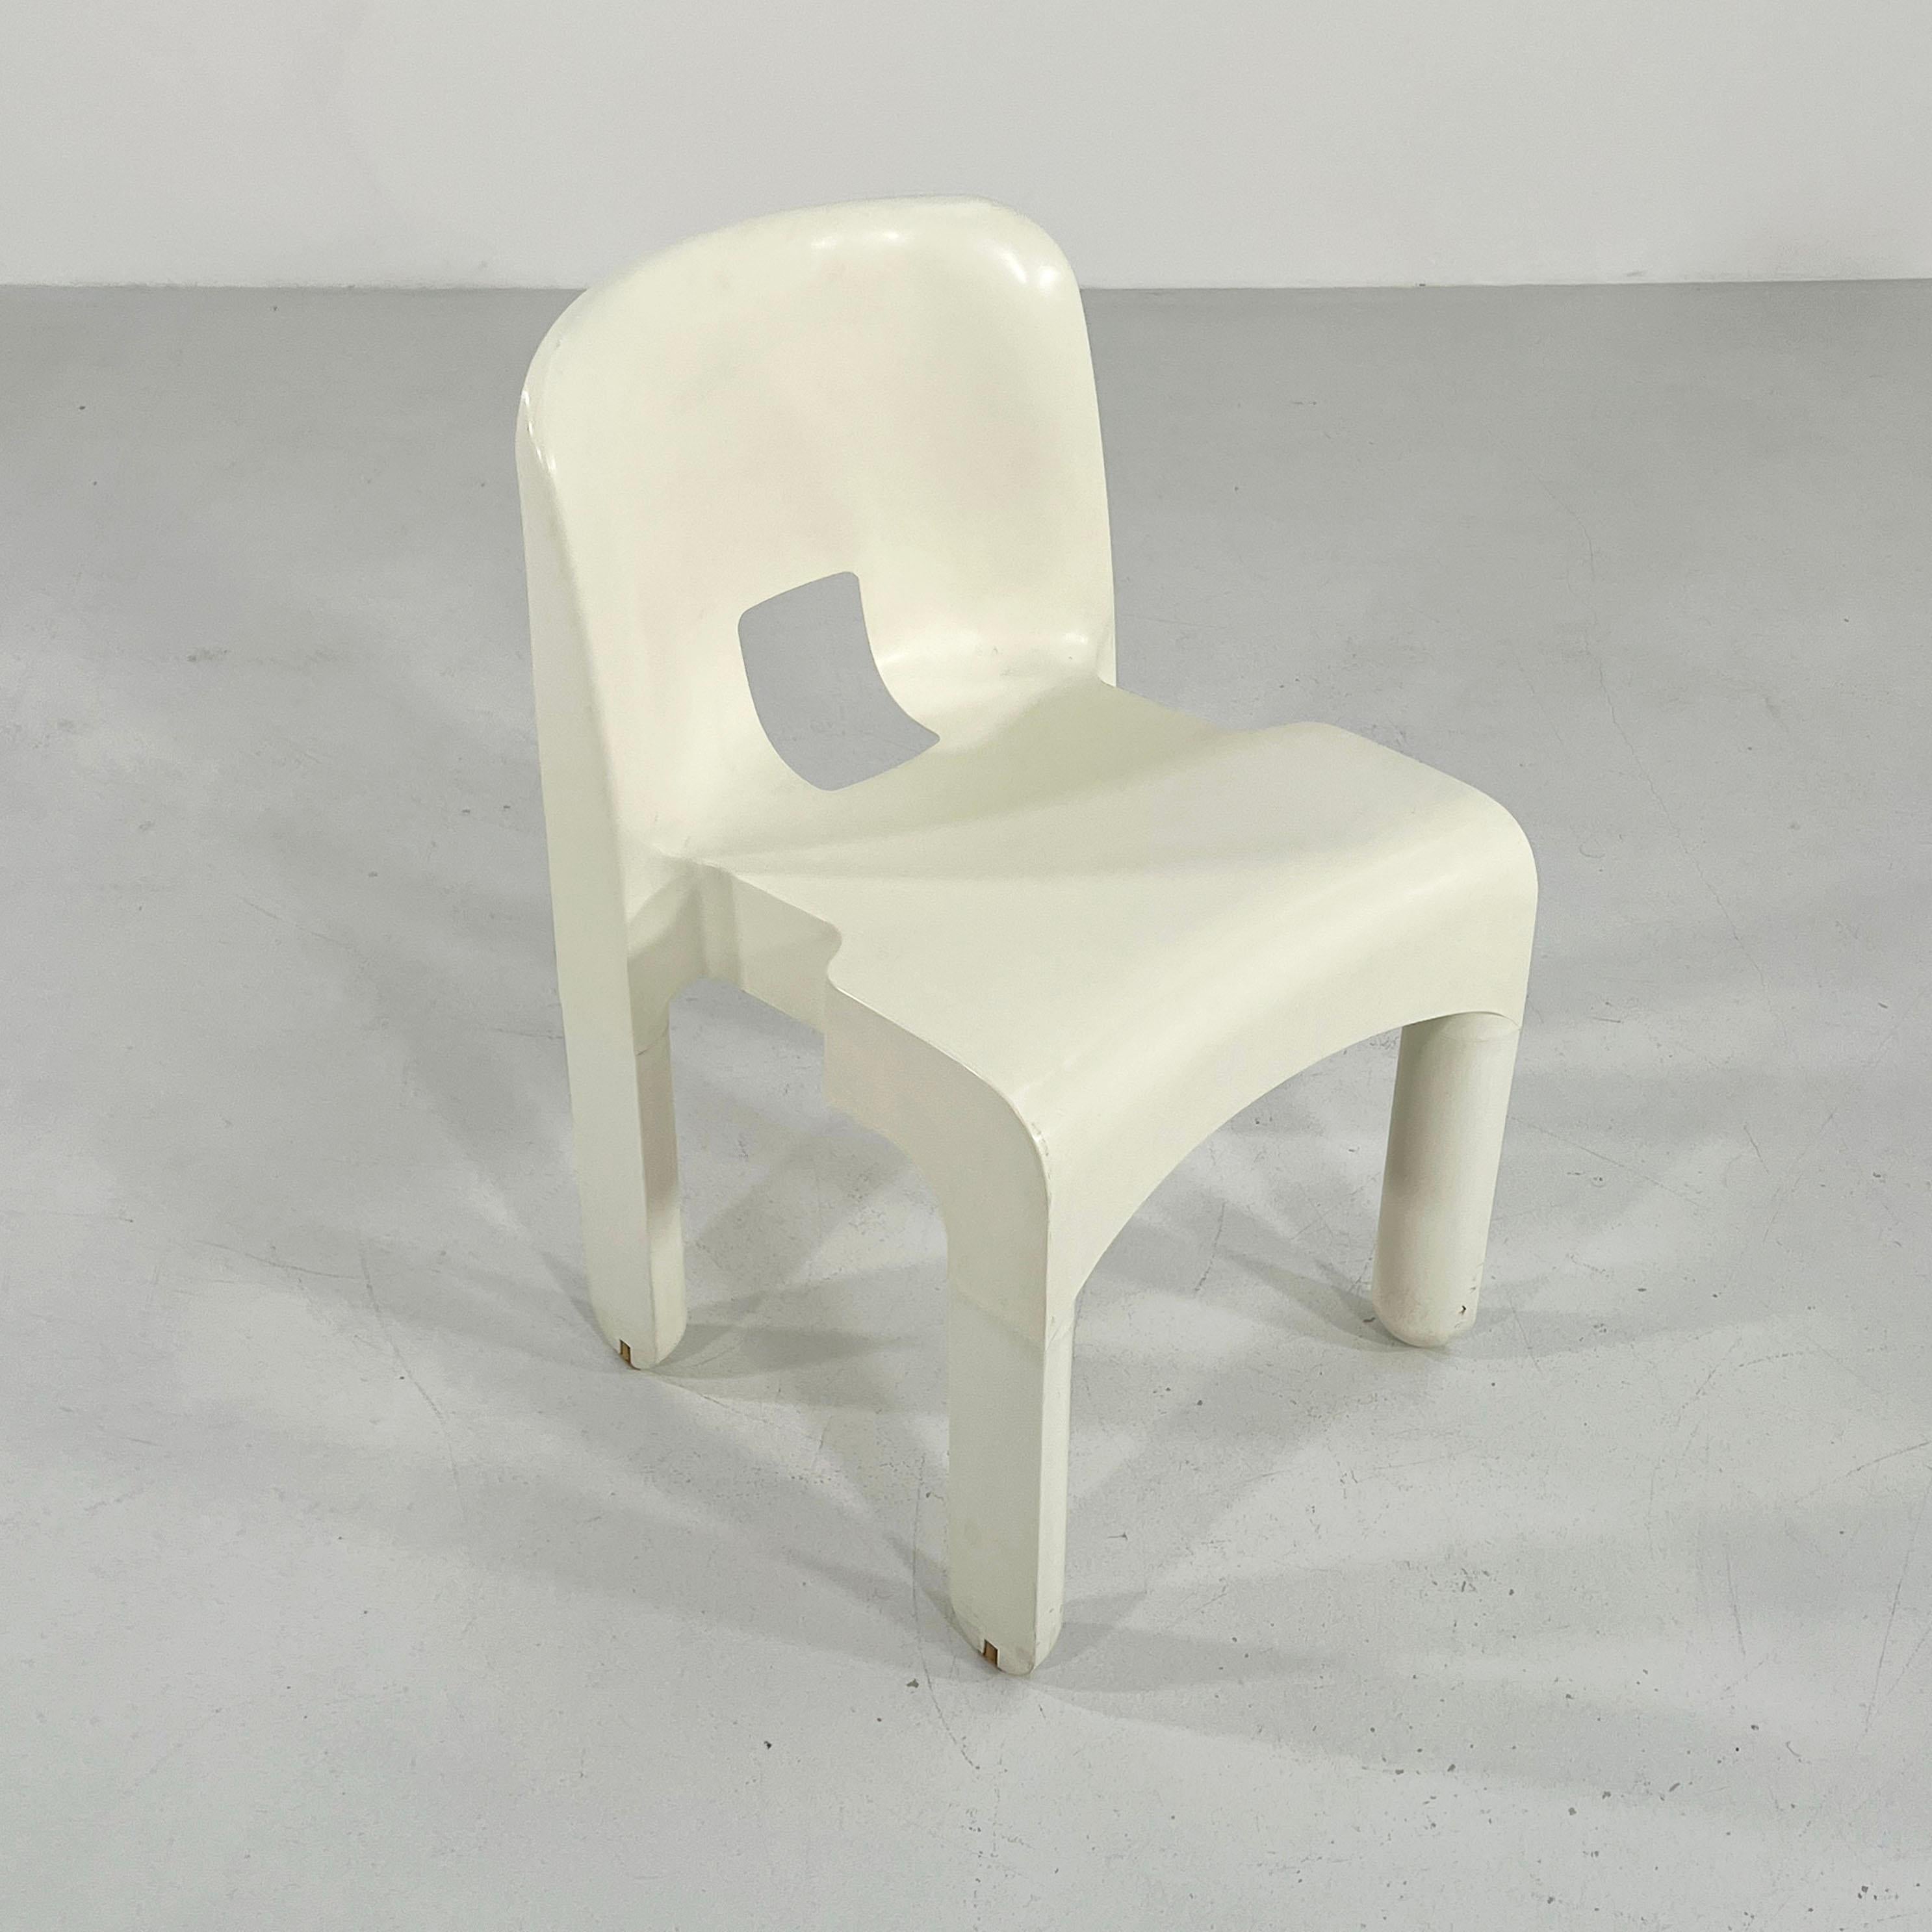 White Model 4867 Universale Chair by Joe Colombo for Kartell, 1970s
4 pieces available - Price is per piece
Designer - Joe Colombo
Producer - Kartell
Model - Universale Chair / Model 4867
Design Period - Seventies
Measurements - width 44 cm x